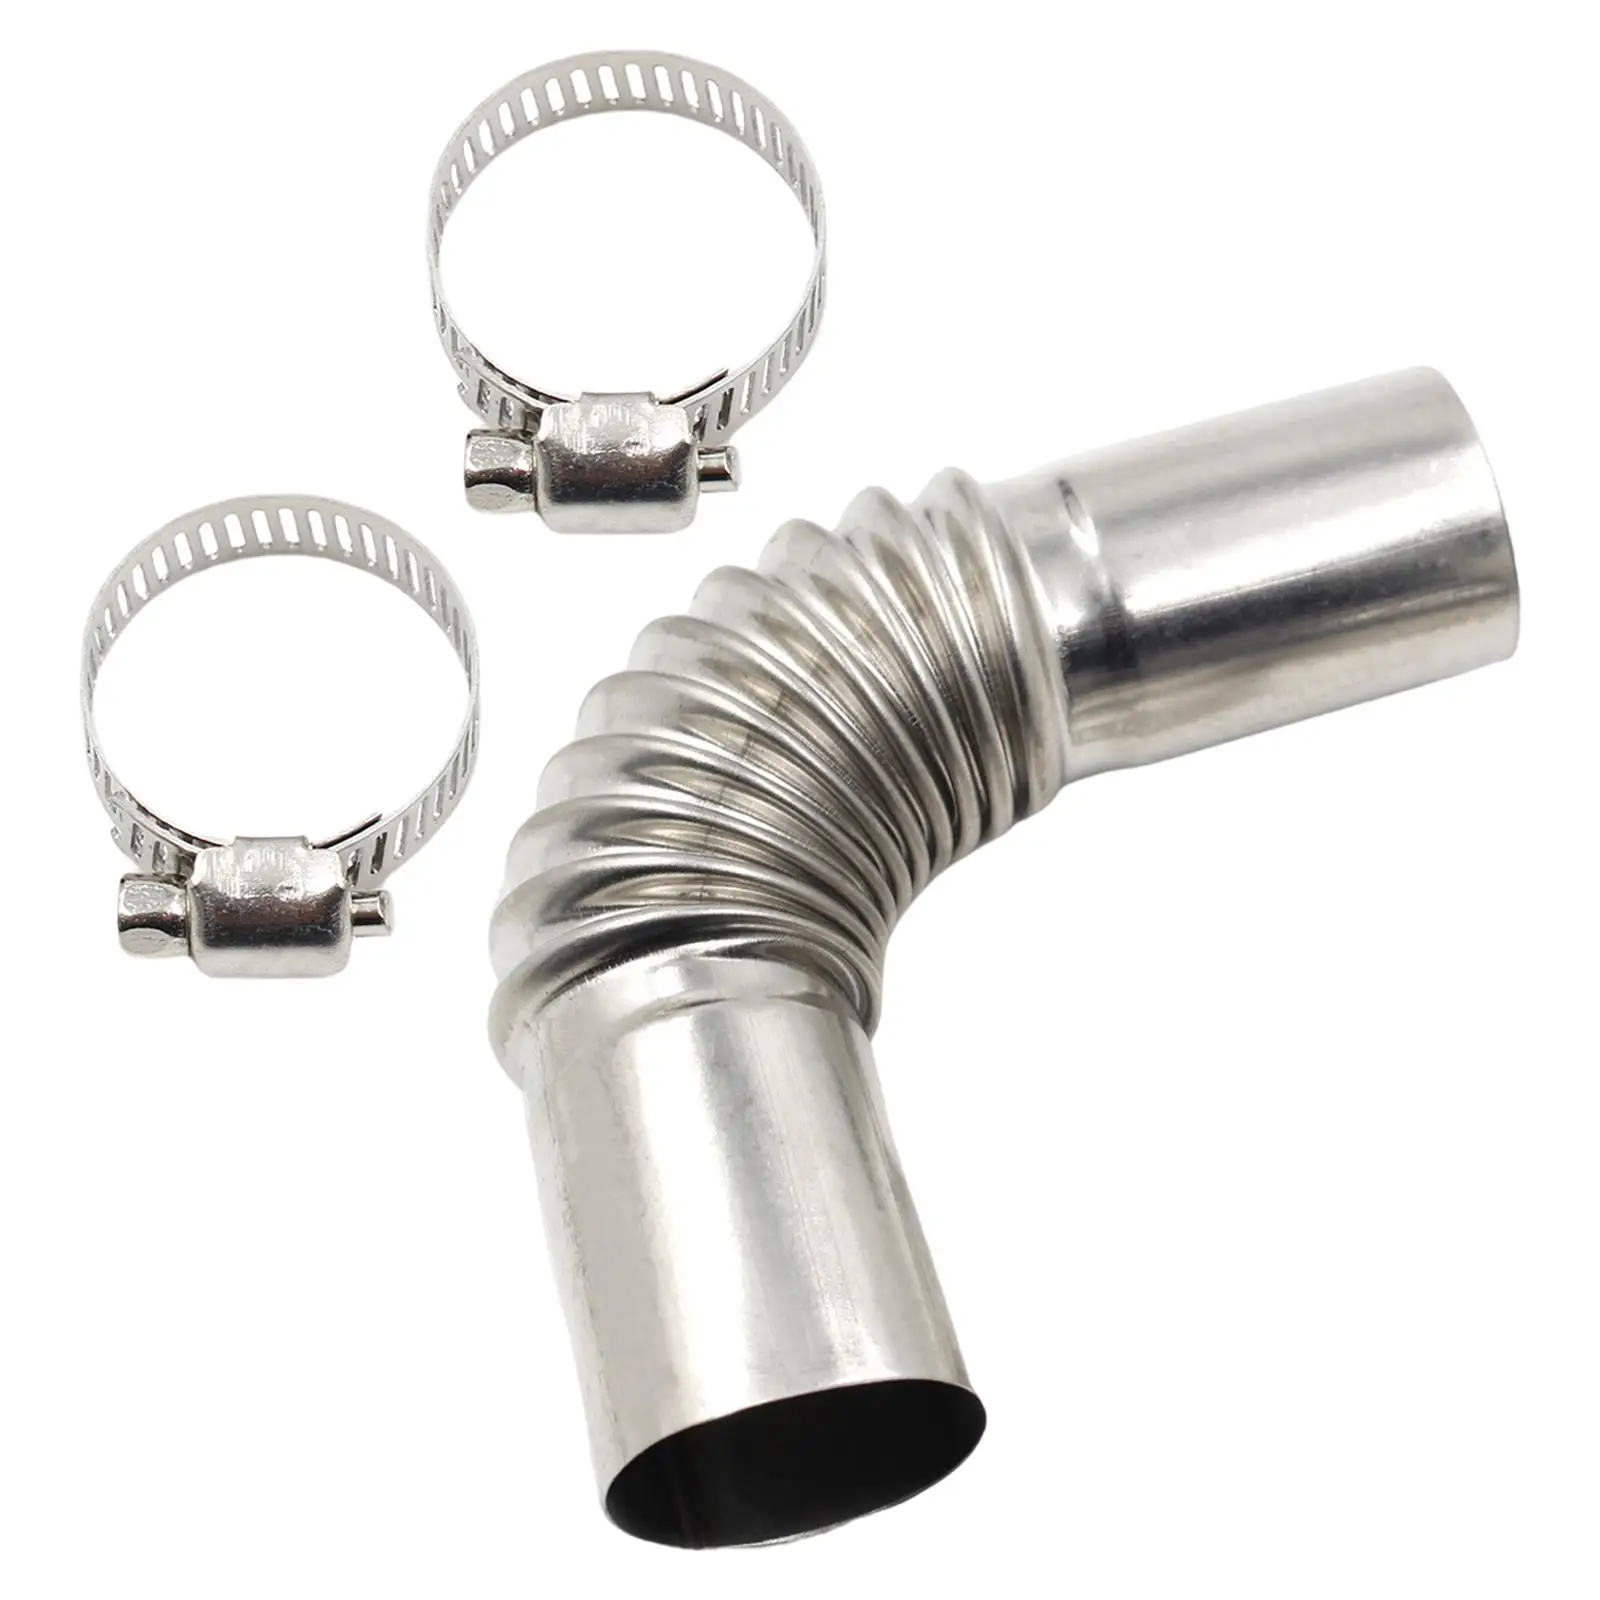 24mm Exhaust Tube Elbow Connector 27mm Od, 25mm ID, Air Exhaust s Connector , W/ Clamps